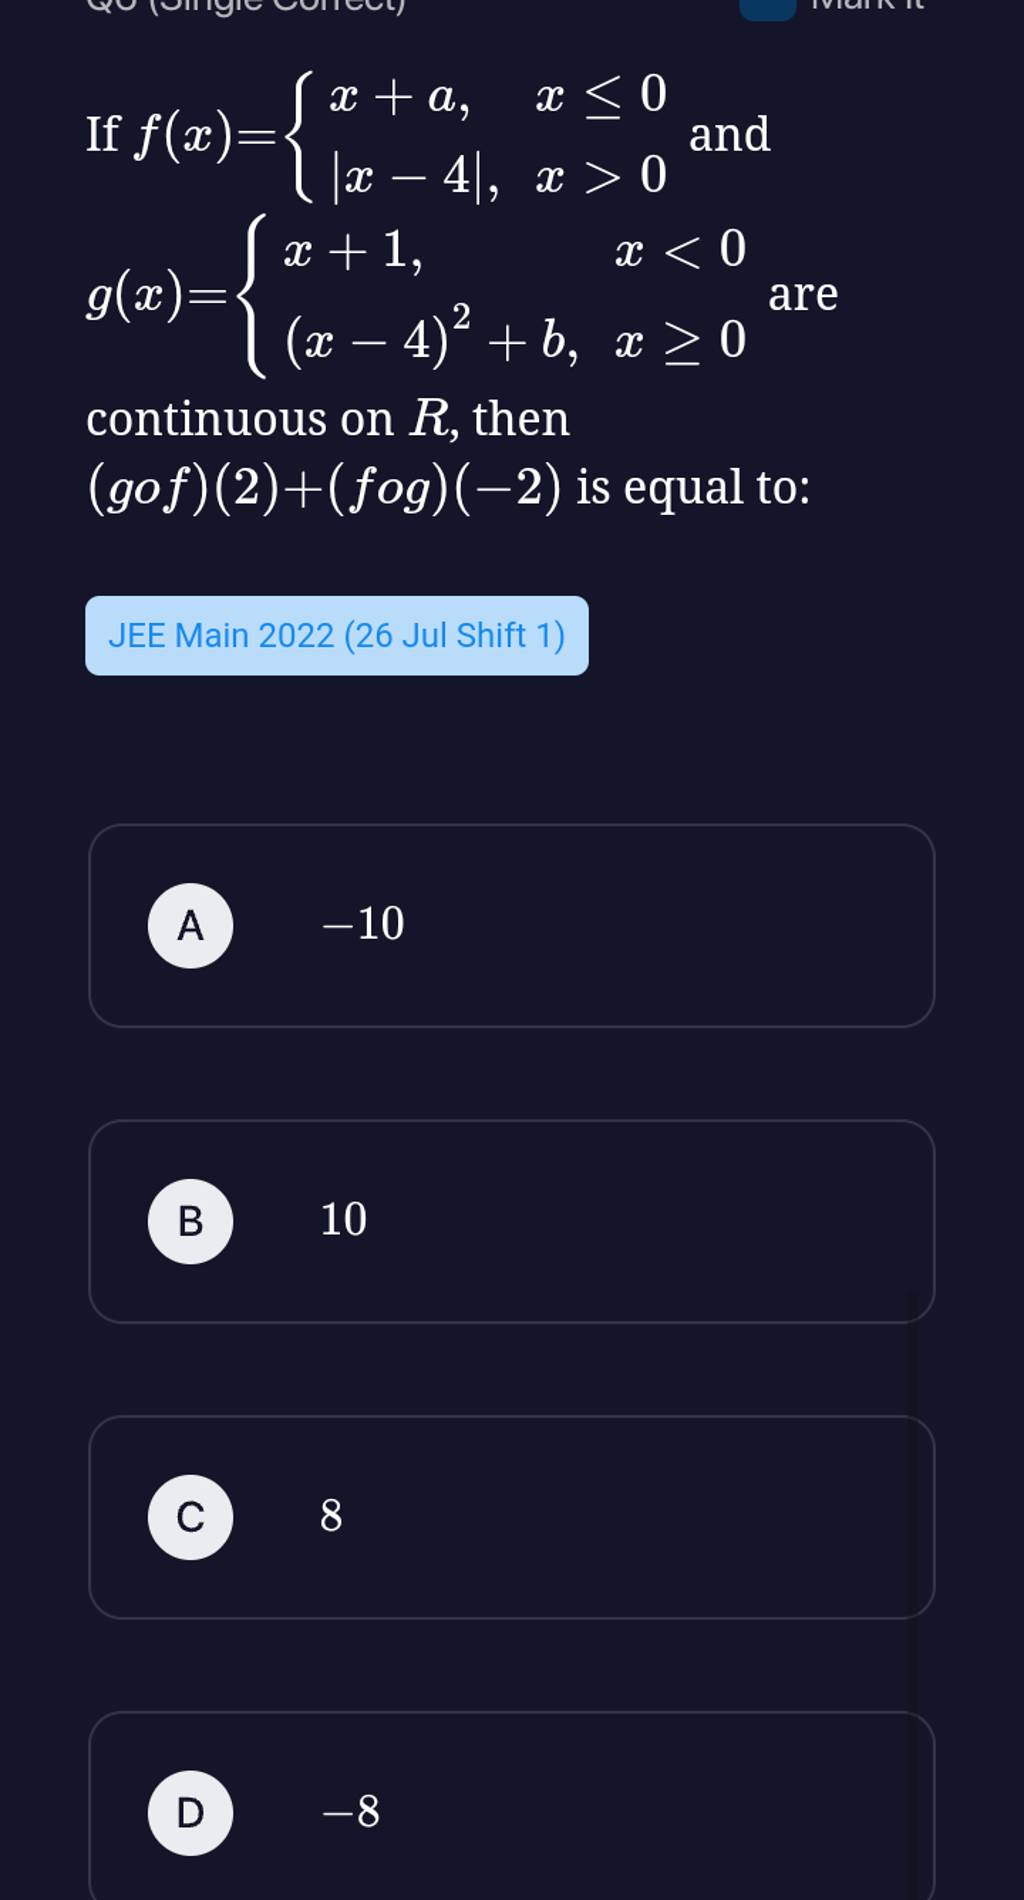 continuous on R, then (g∘f)(2)+(fog)(−2) is equal to:JEE Main 2022 (26